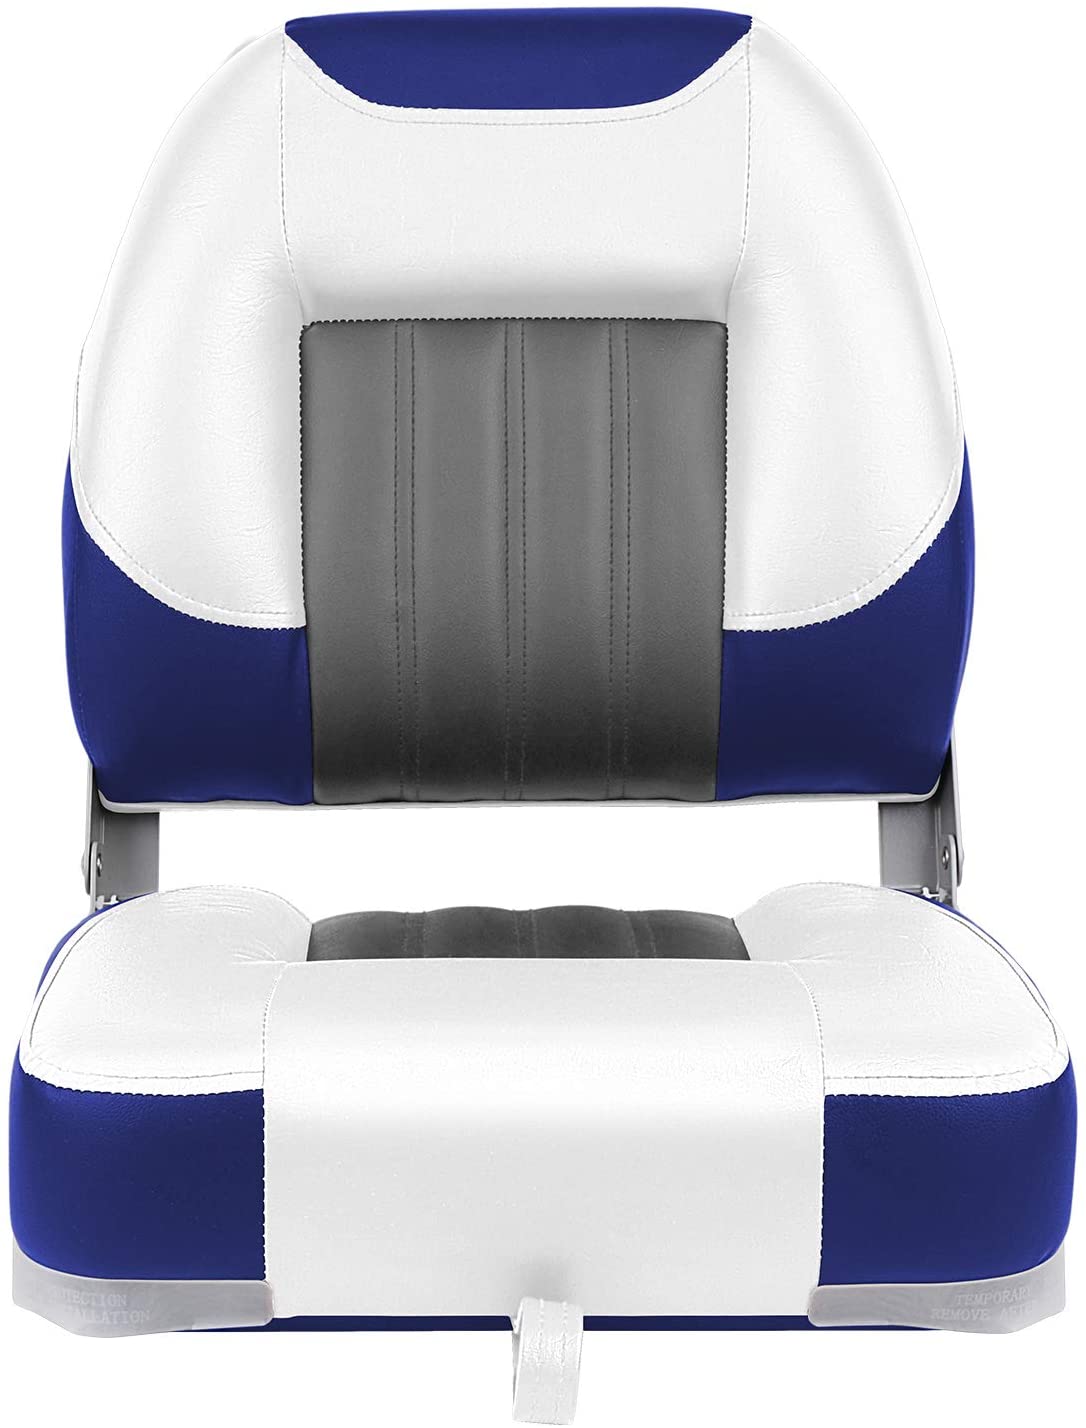 Leader Accessories Deluxe Low Back Folding Fishing Boat Seat - image 4 of 7